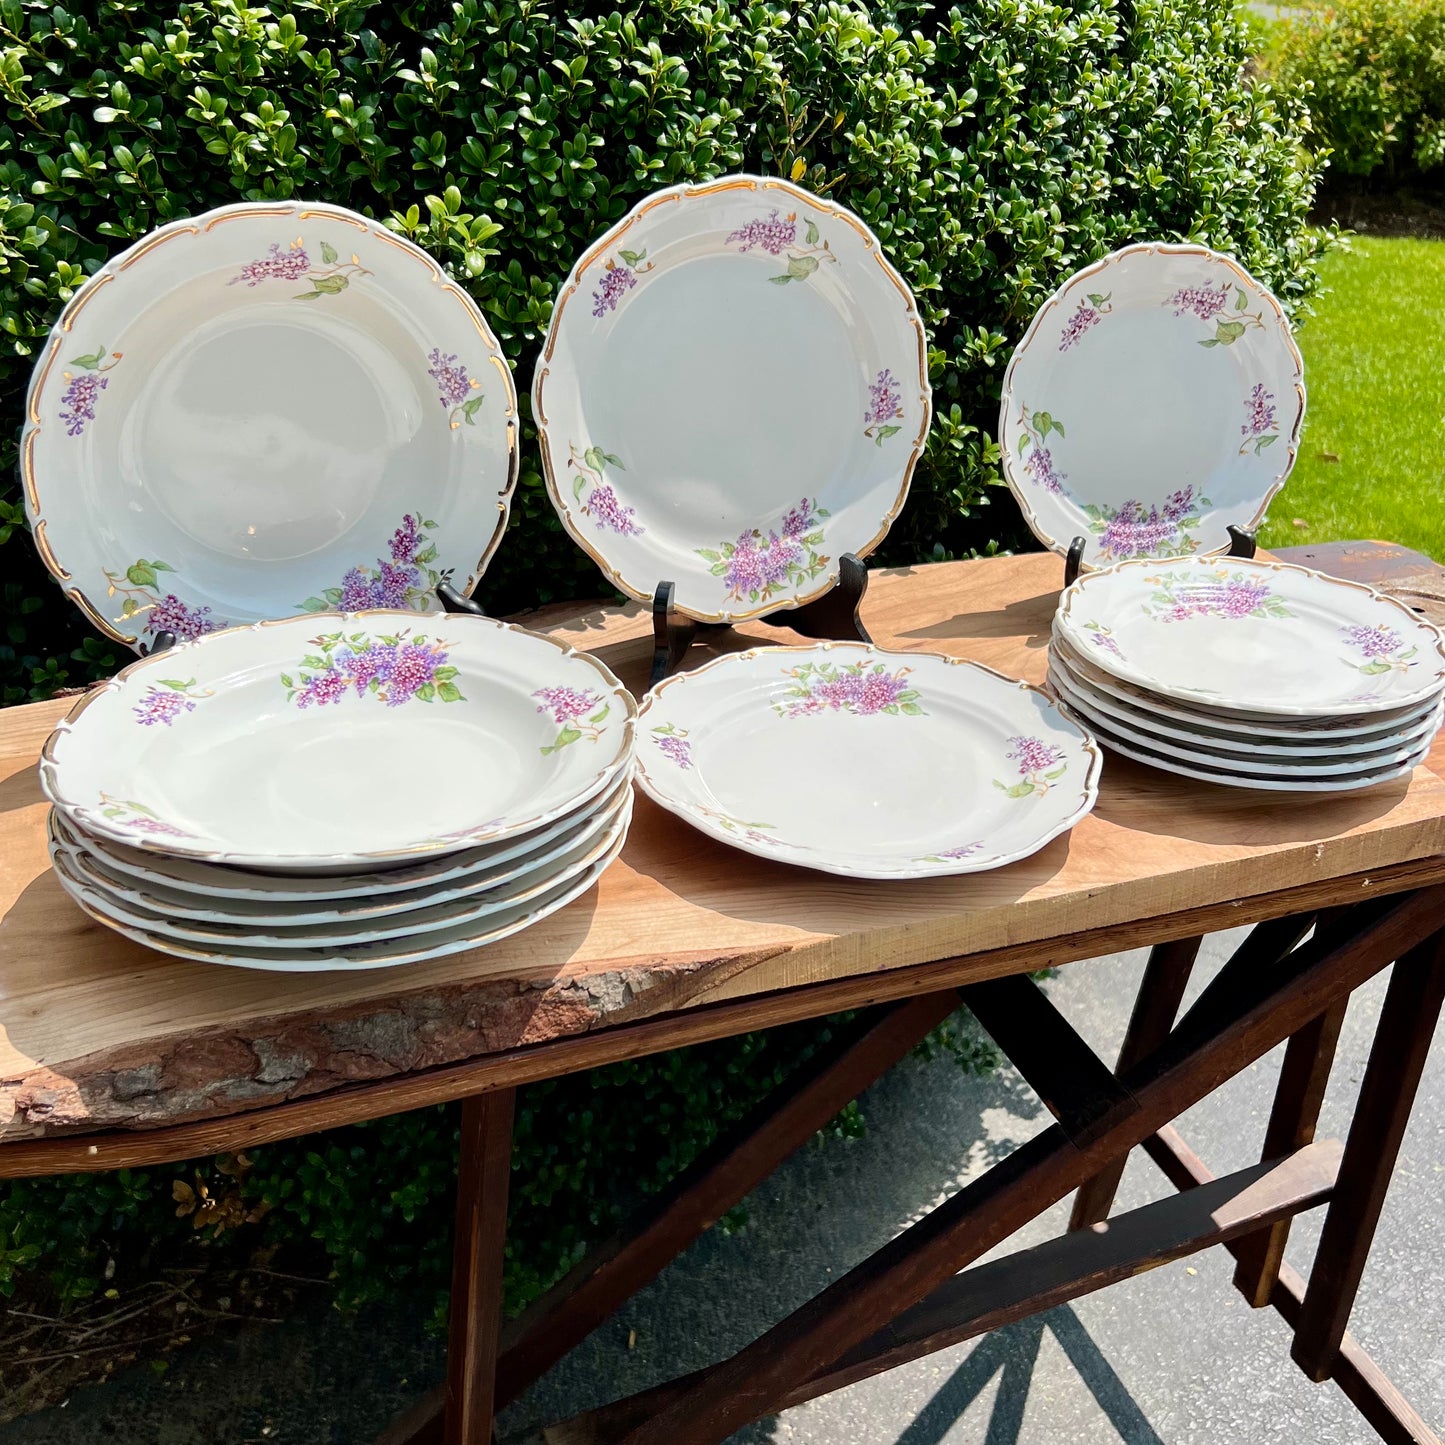 11 Vintage Lilac Dinner, Luncheon & Rimmed Bowls A3